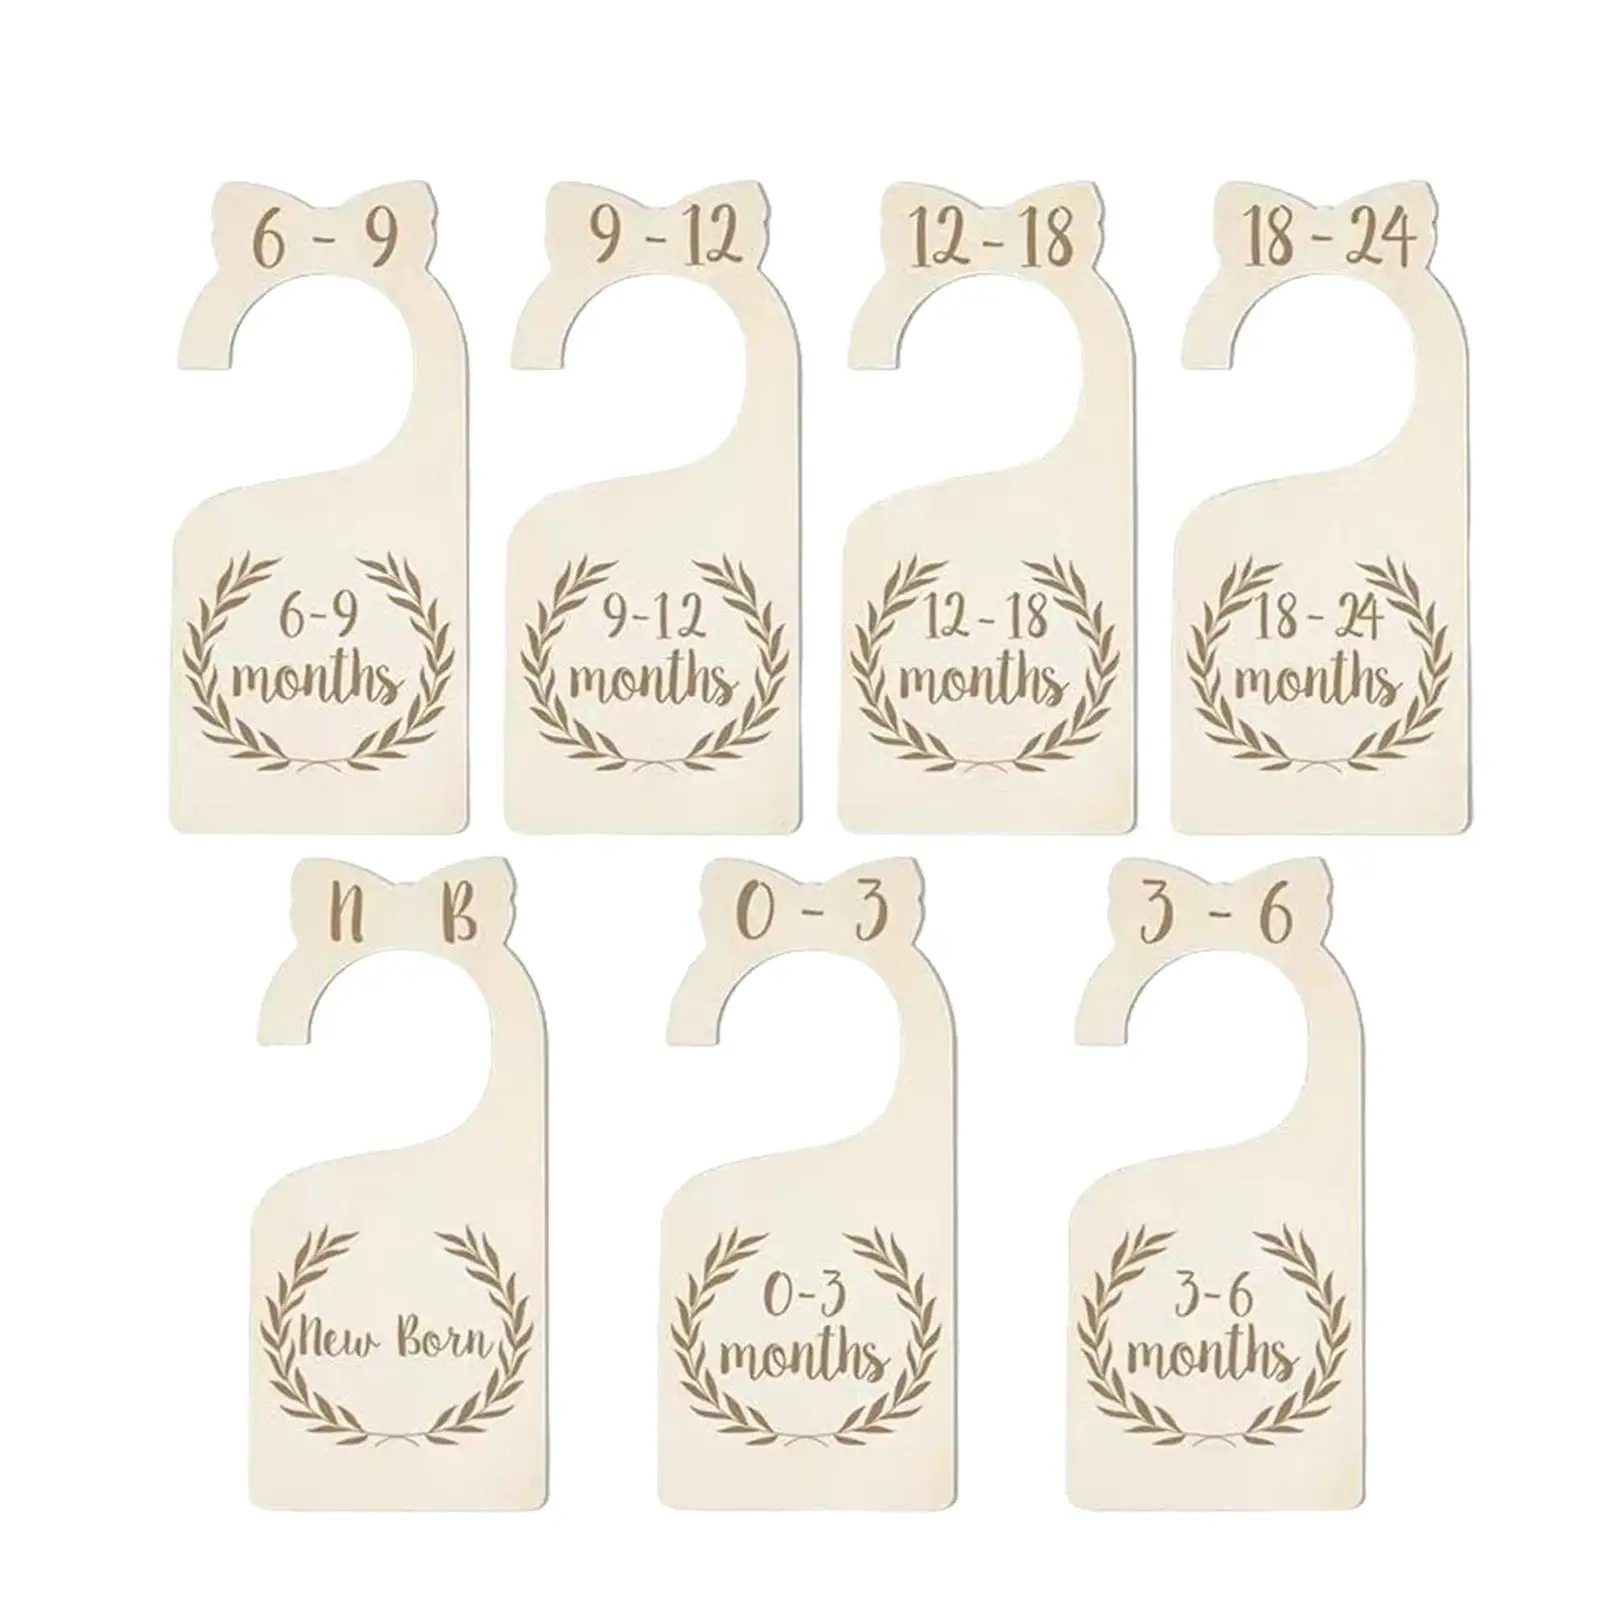 7 Pieces Baby Closet Dividers Clothes Sorting Tags Nursery Closet Organizers Baby Clothes Size Hanger Organizer for Daily Use